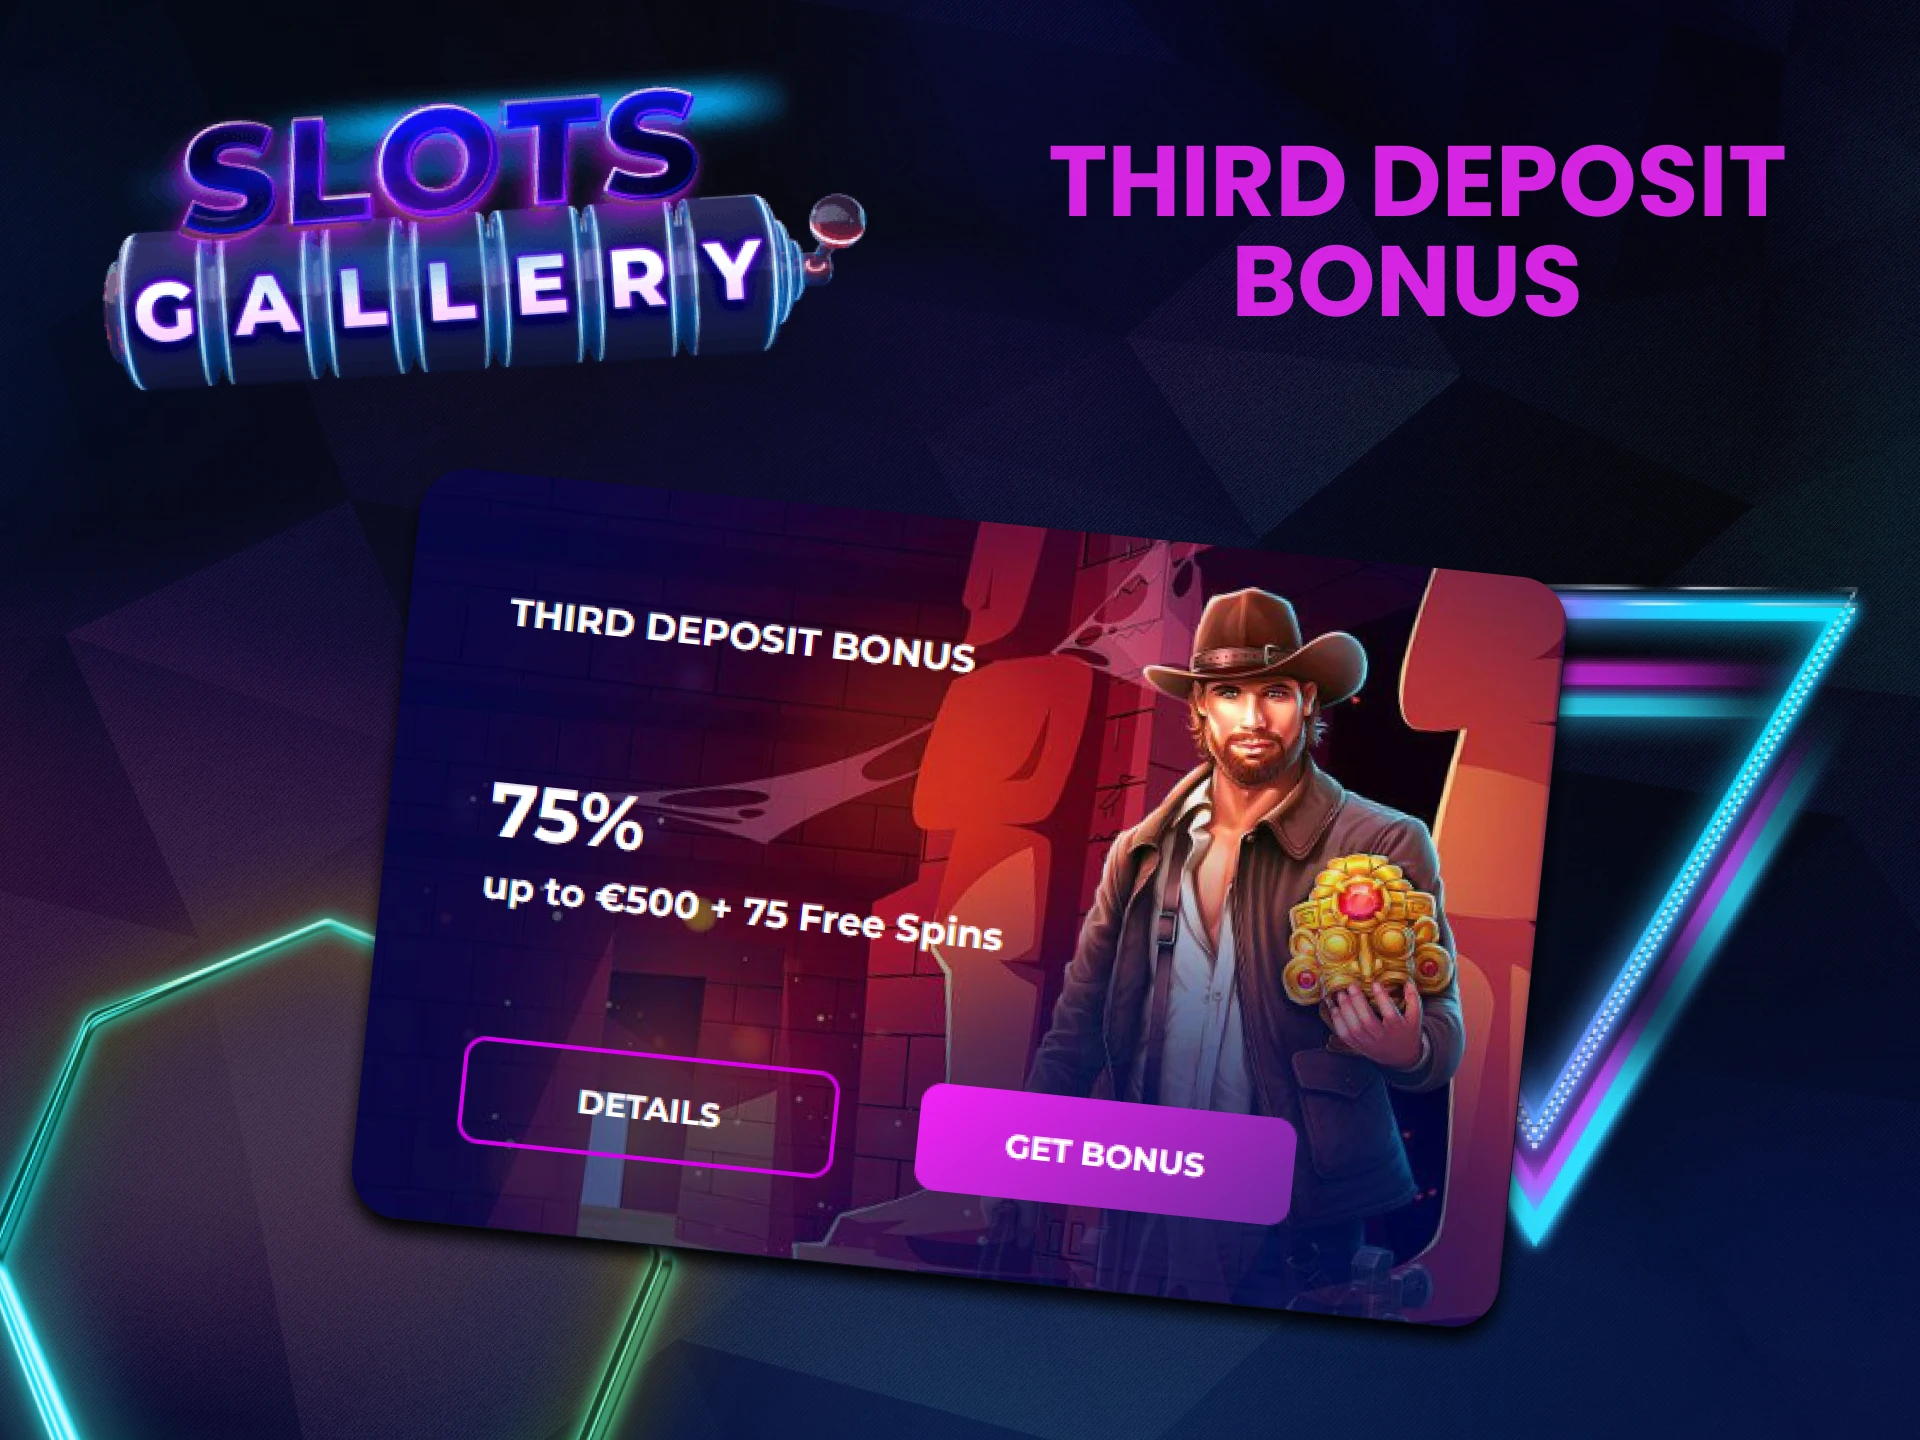 Slots Gallery gives a bonus for your third deposit.